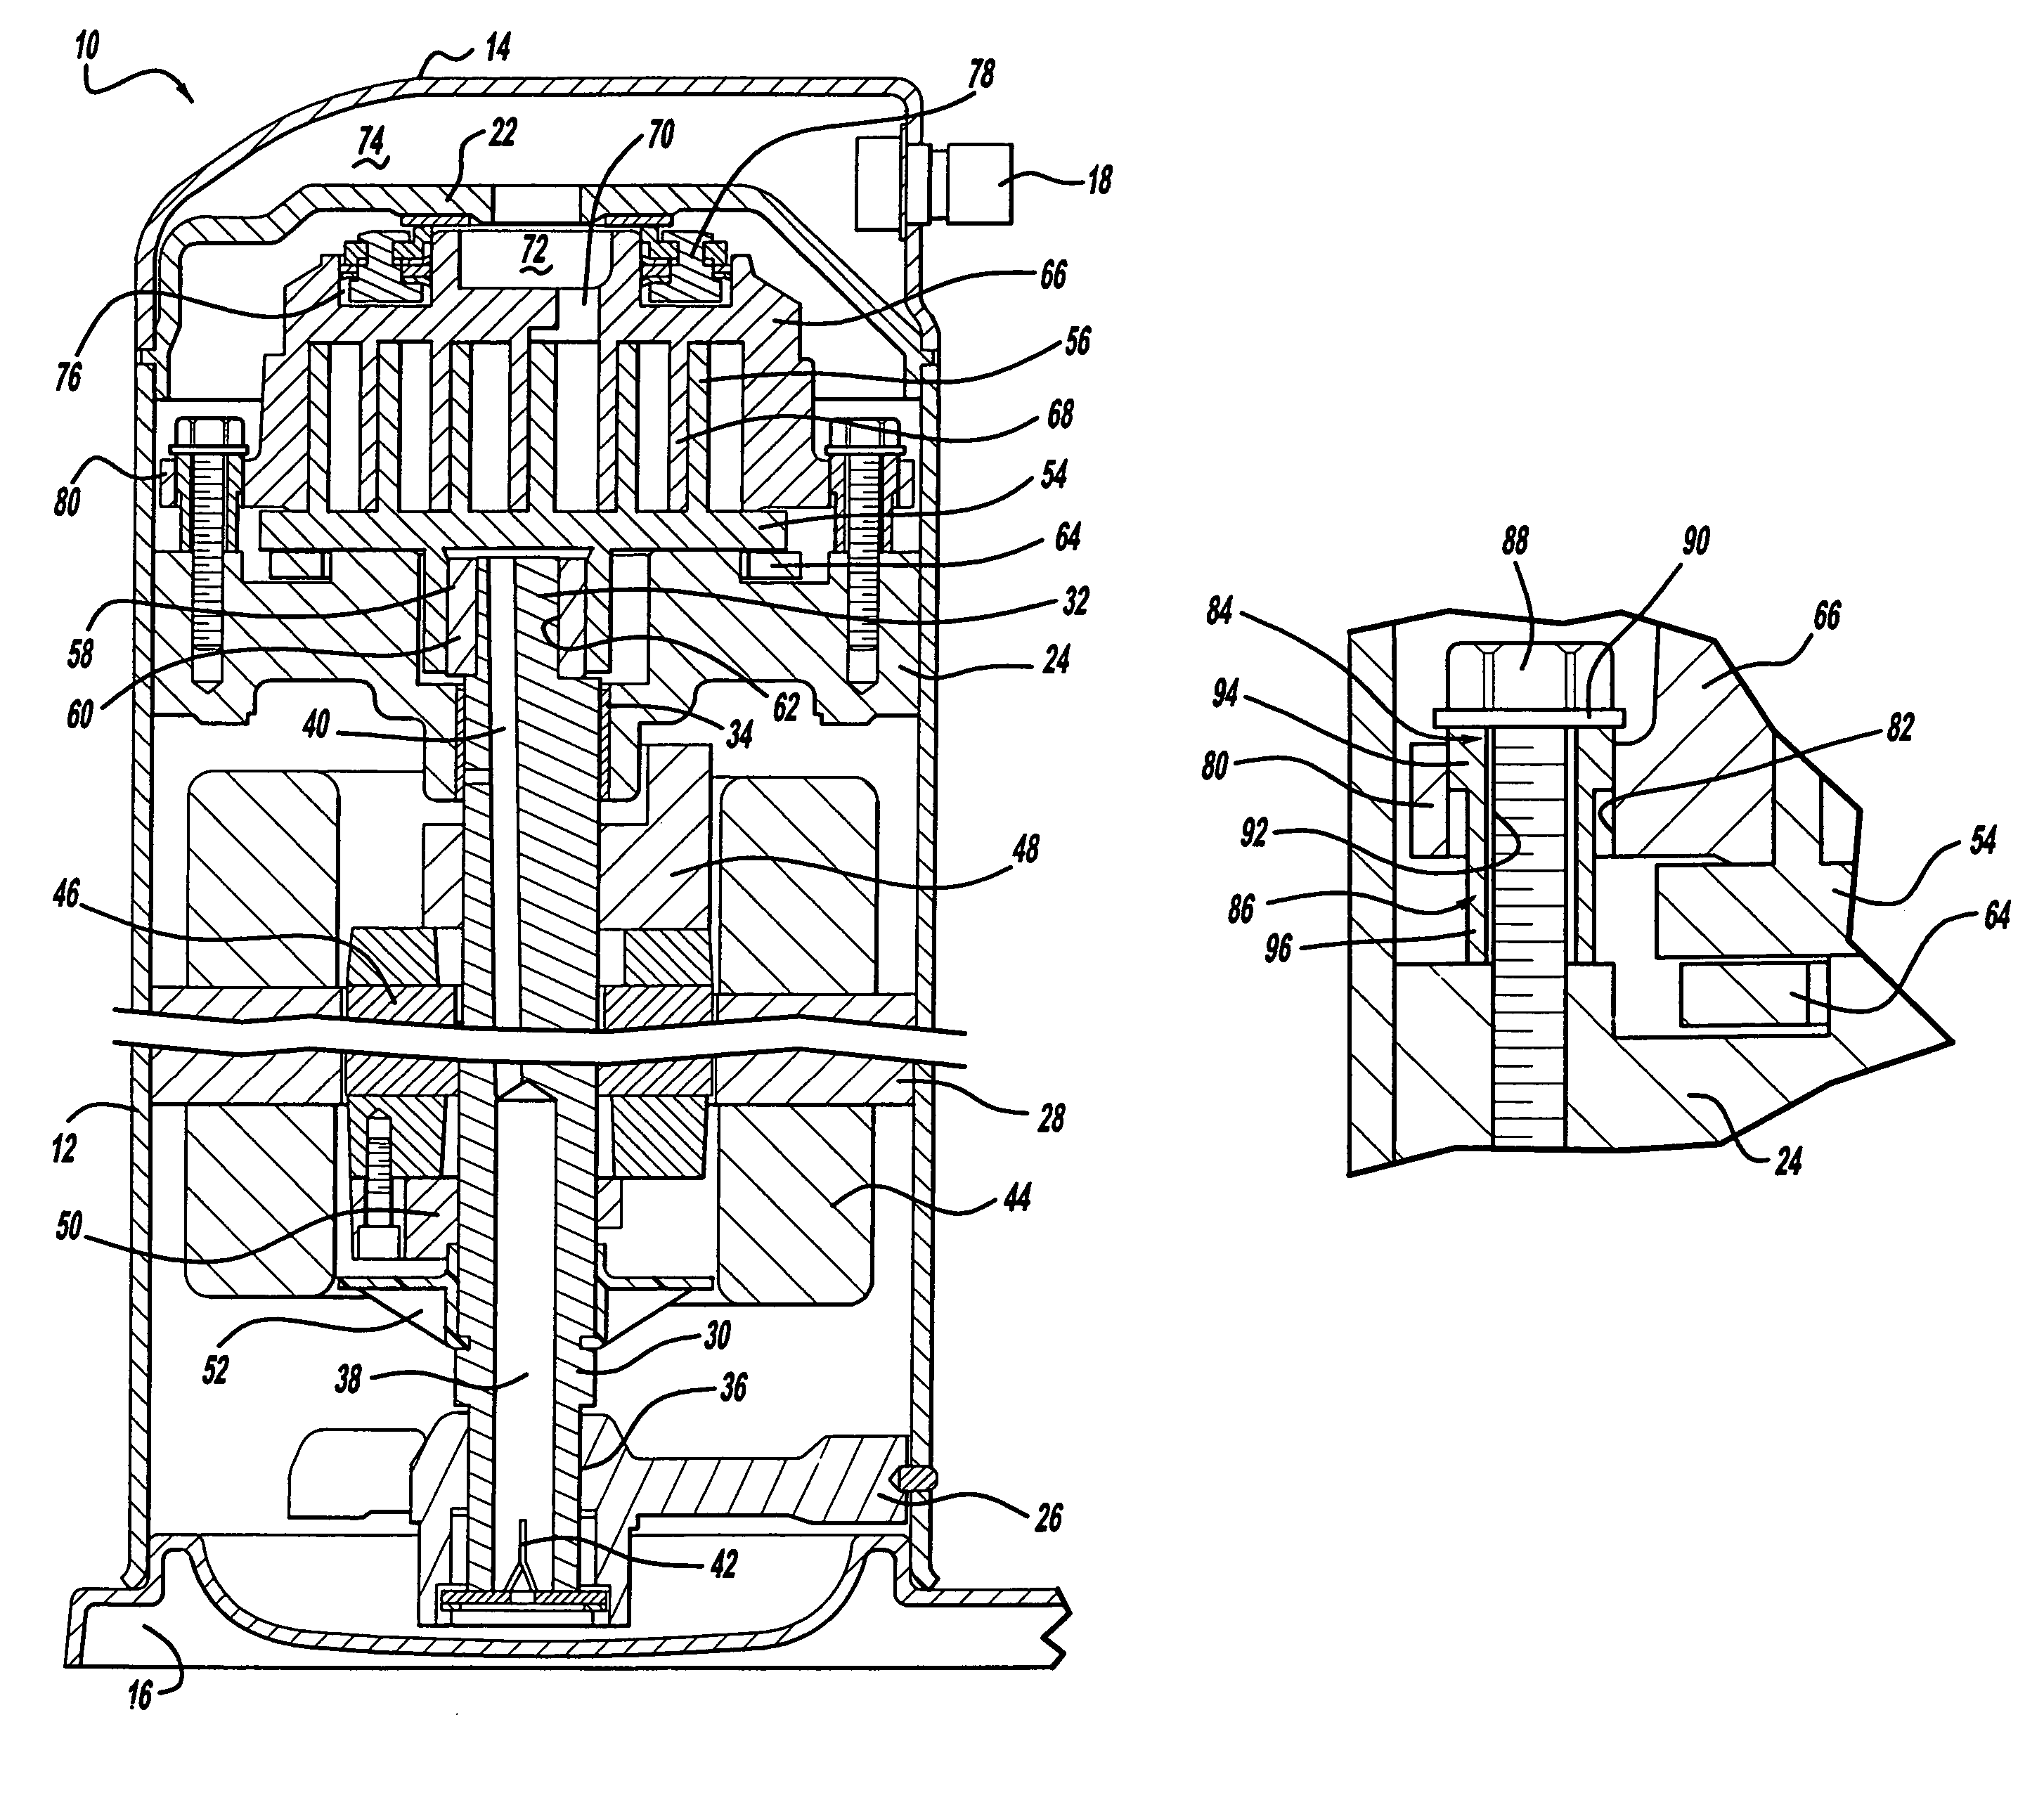 Scroll machine with stepped sleeve guide